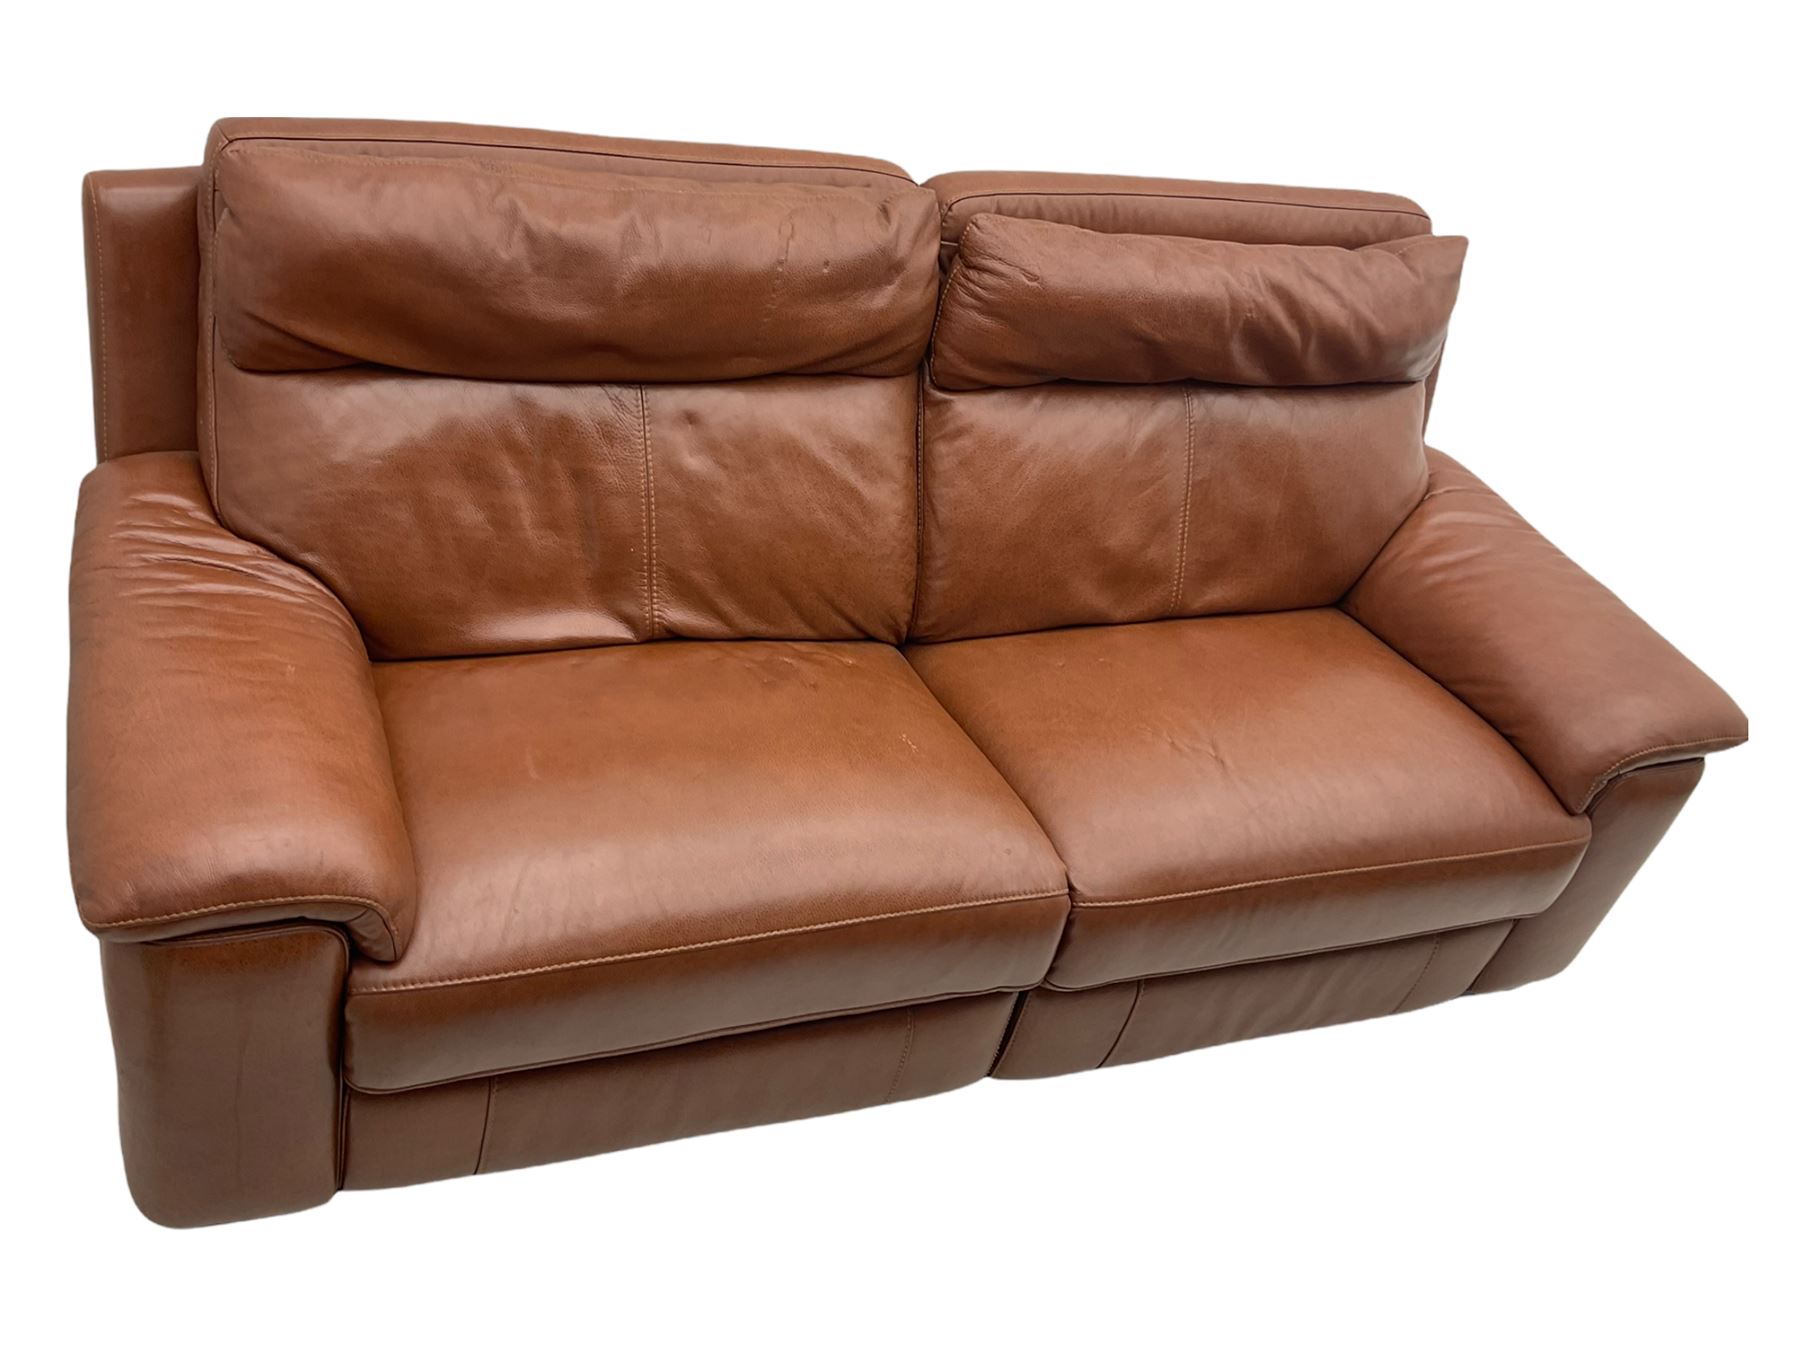 Three electric reclining sofa upholstered in tan leather - Image 4 of 23